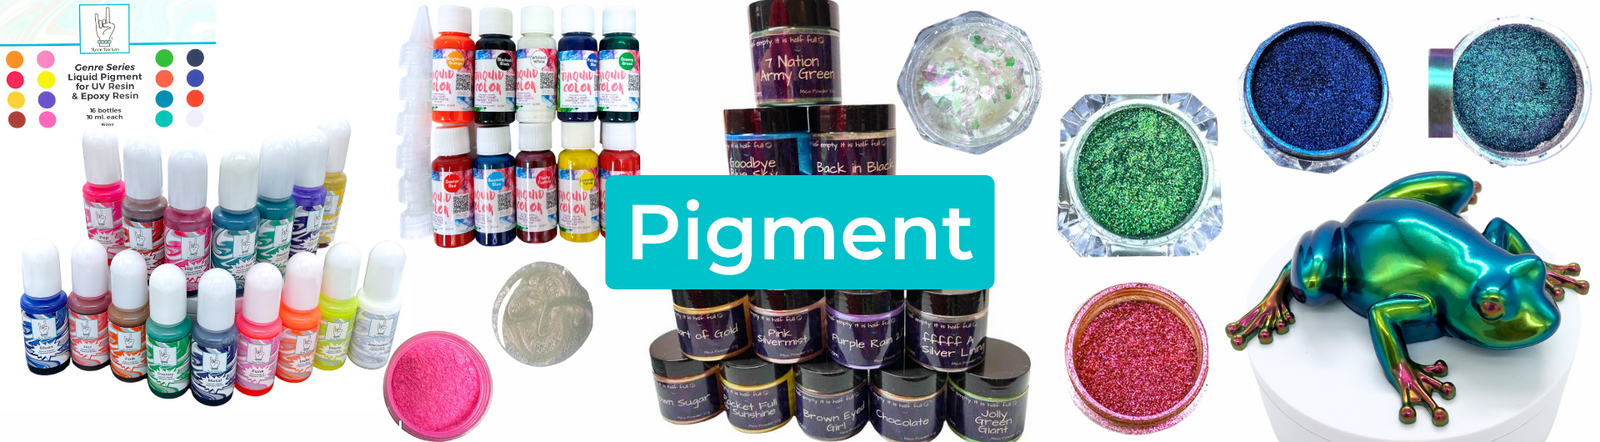 Thiquid Liquid Concentrated Pigment for Epoxy Resin Art